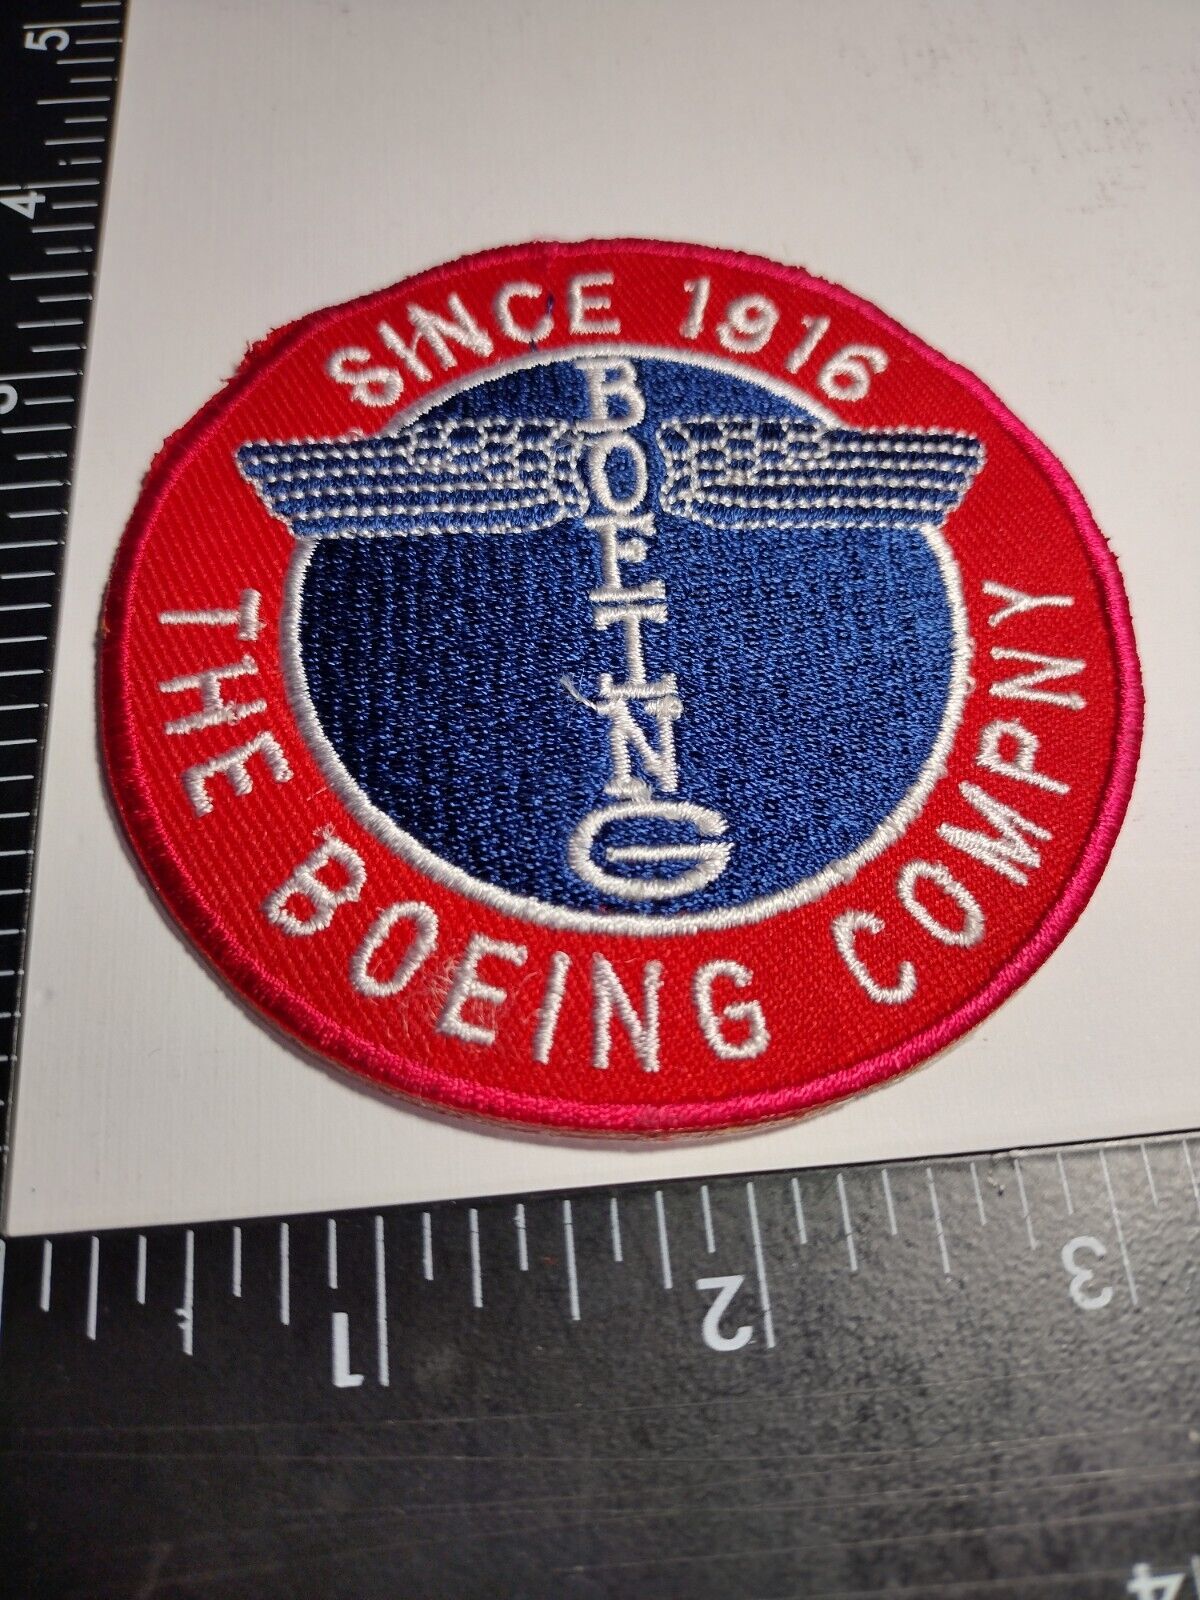 Boeing Patch Since 1916 sew or iron High Quality Embroidery Fast Shipping W/TRK#